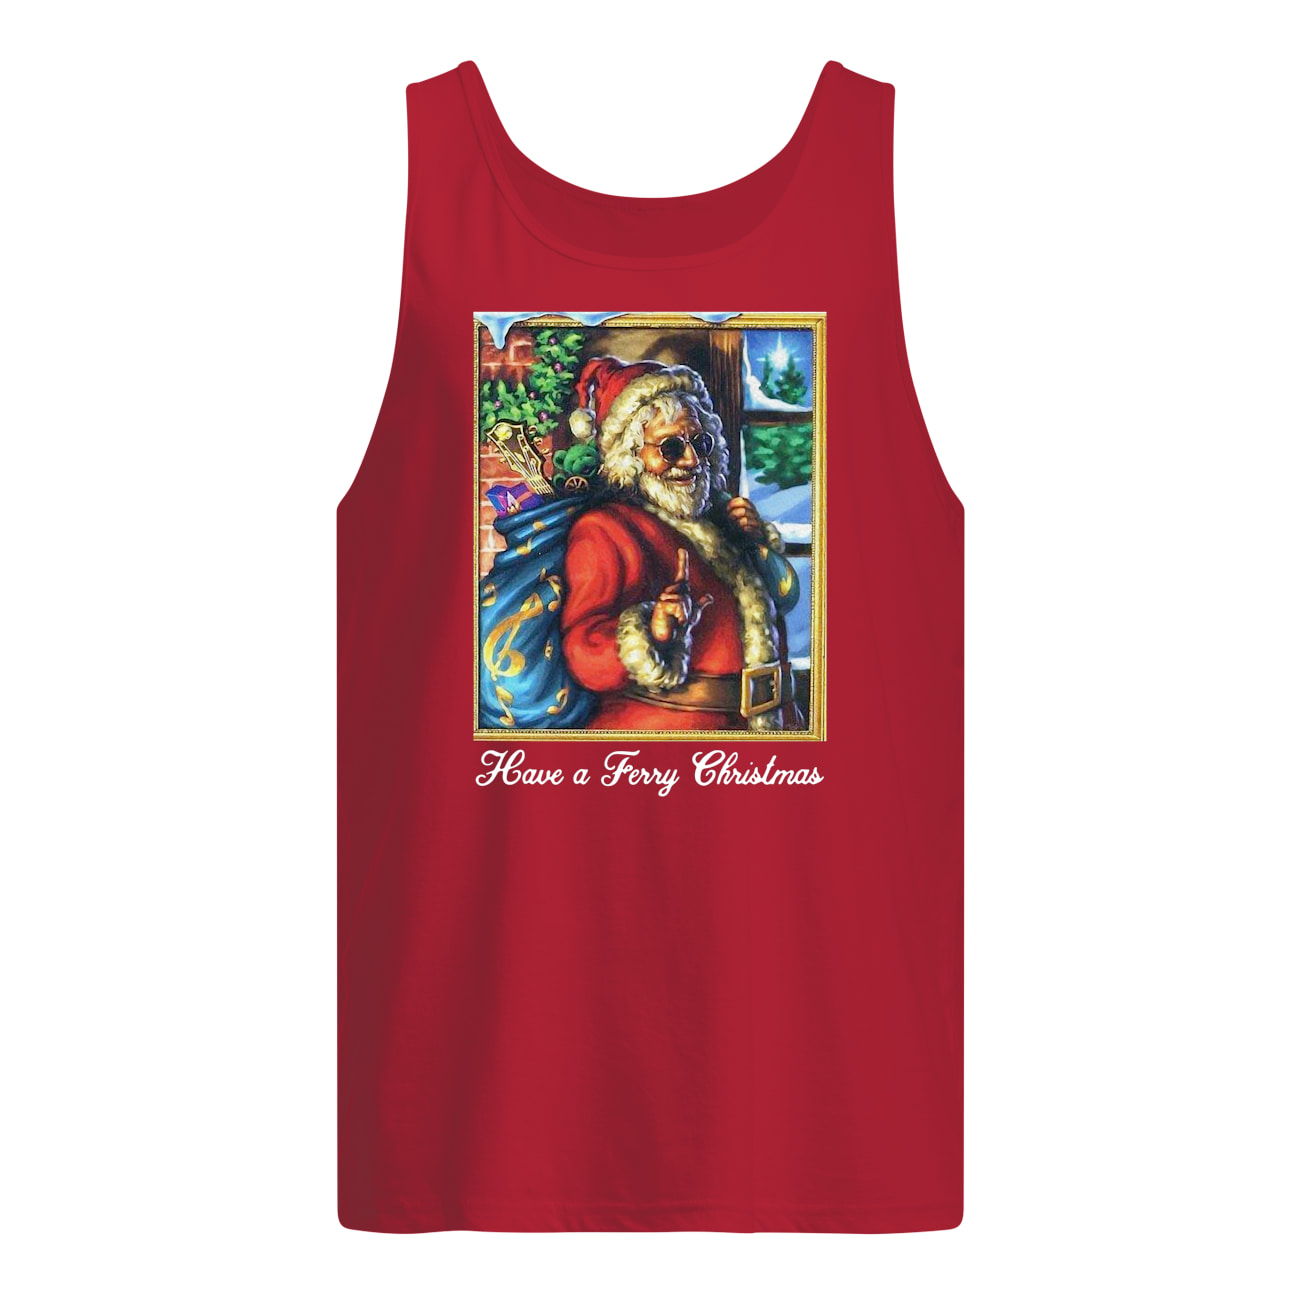 Santa claus have a ferry christmas tank top